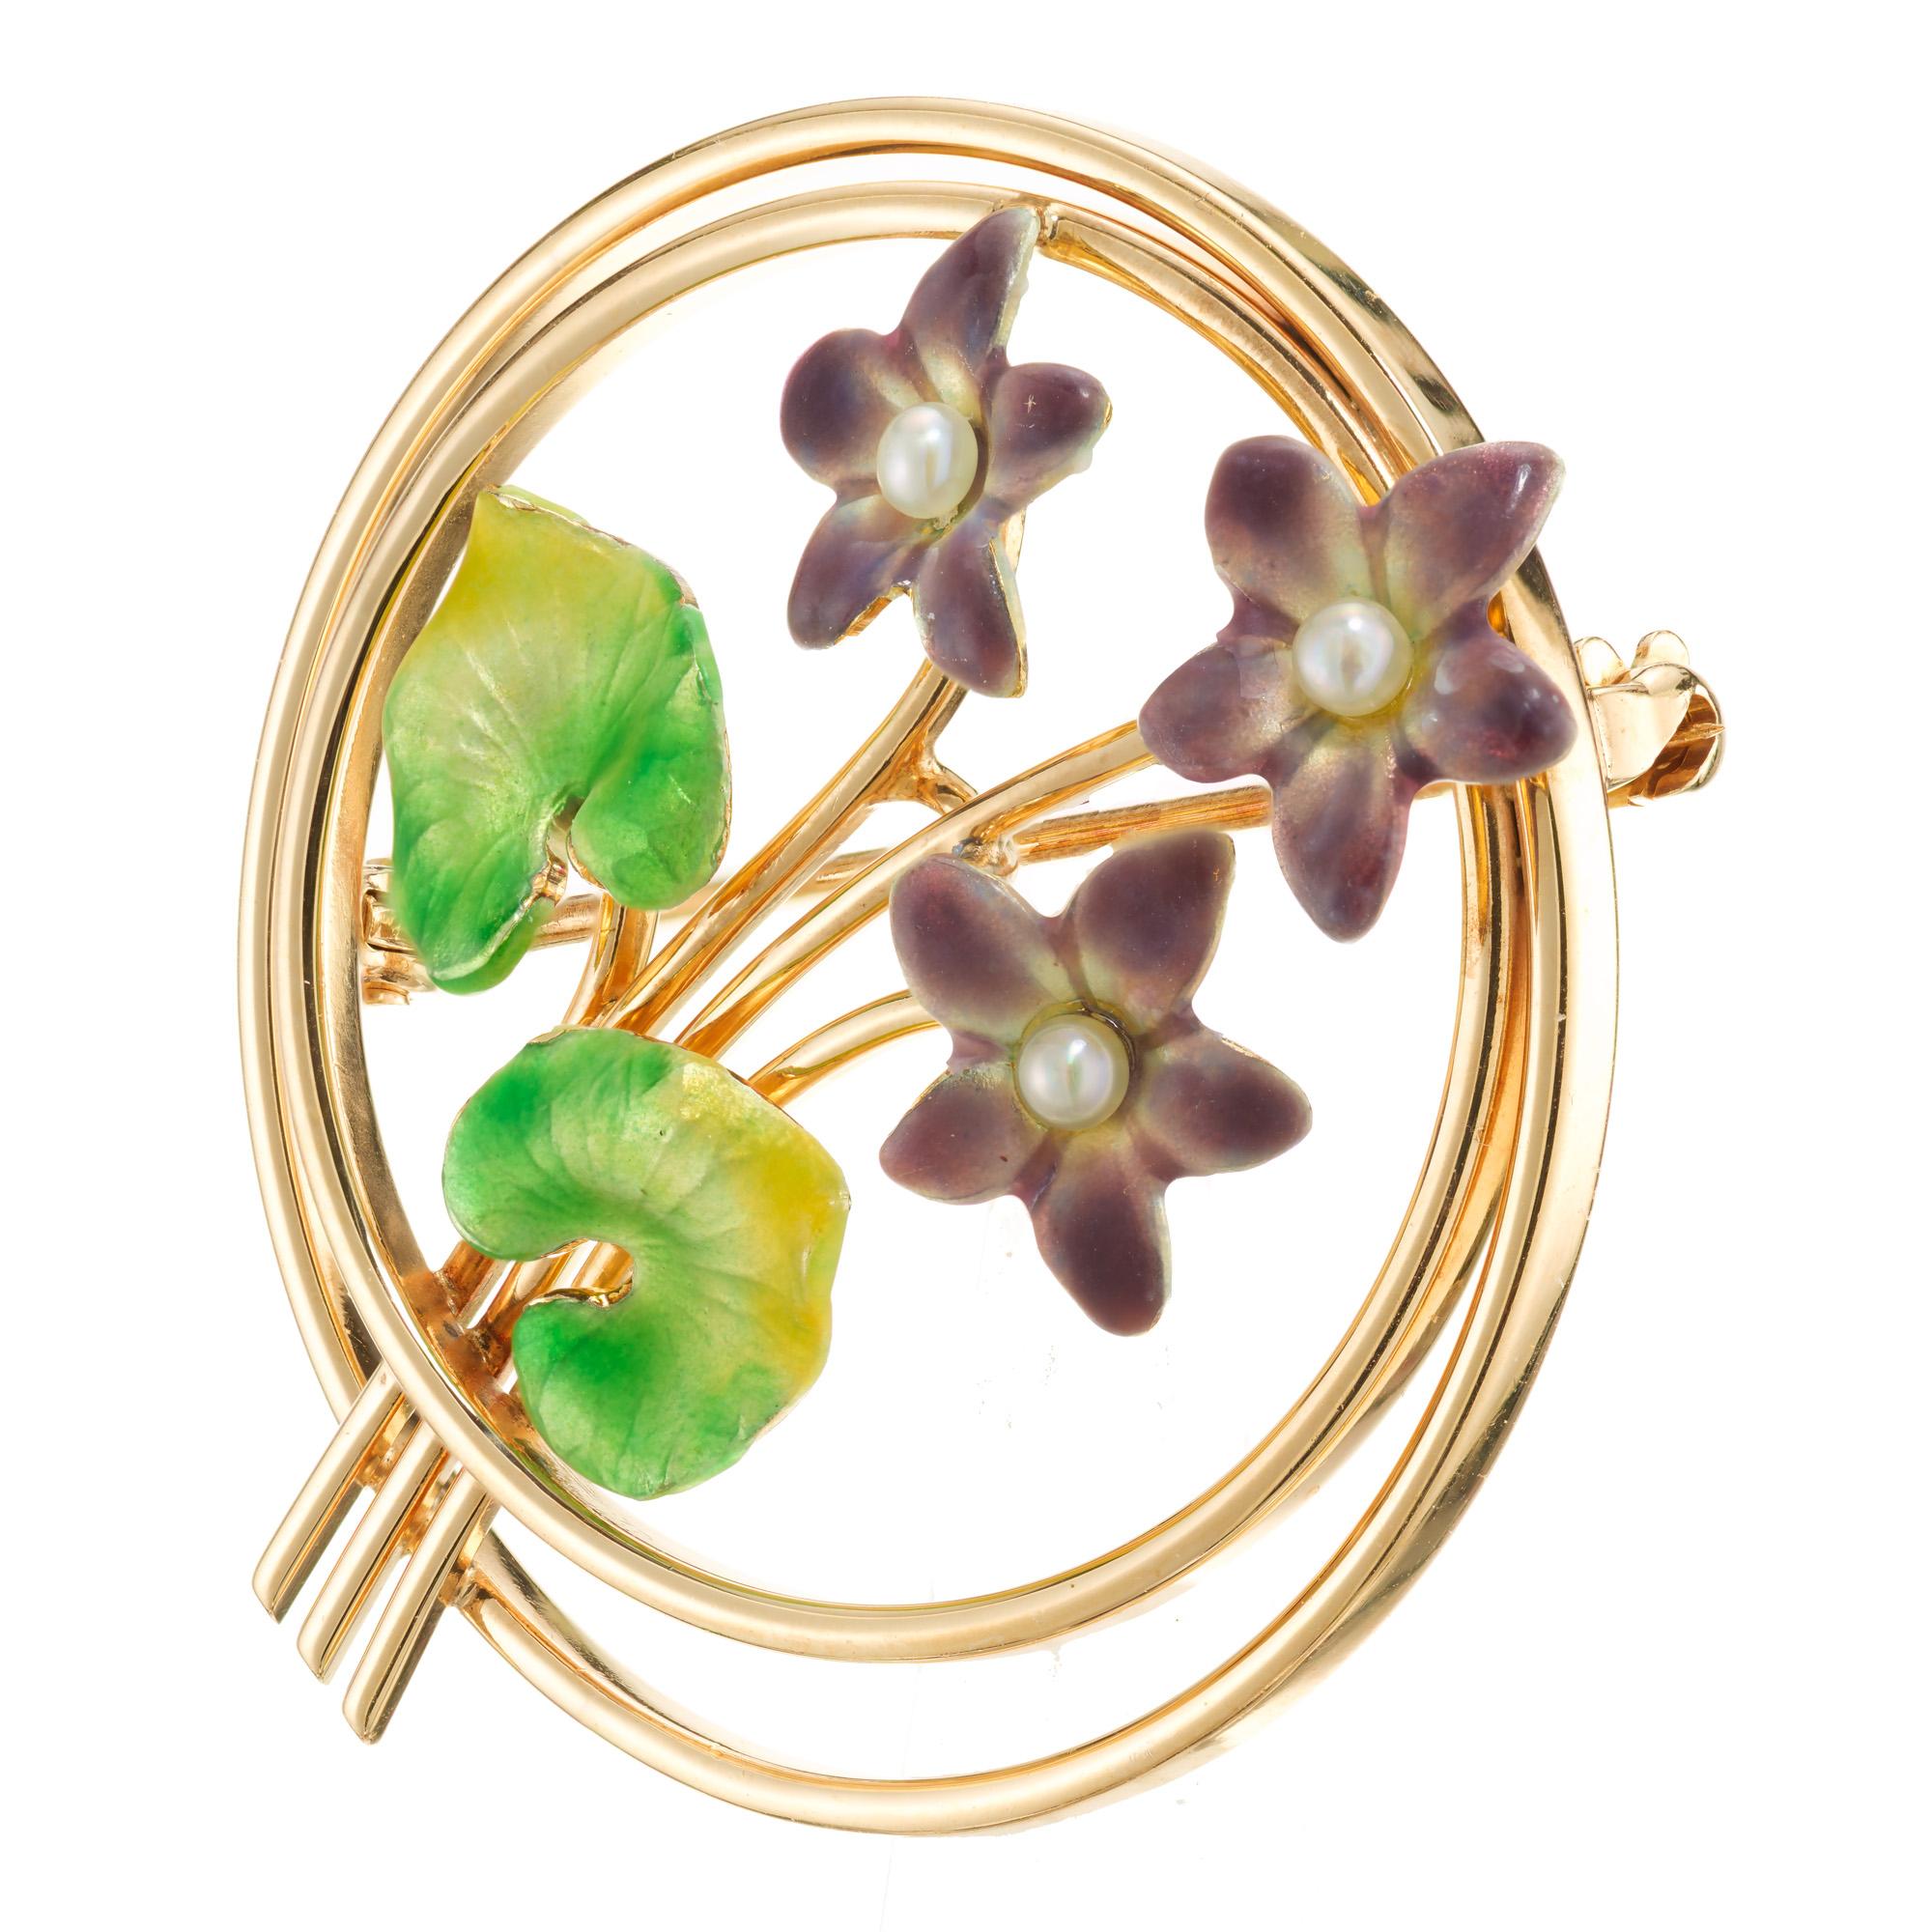 1930's Art Deco Krementz enamel brooch. 14k rose gold setting with 3 purple enamel flowers each with a round center pearl. Two bright green and yellow enamel leaves.

14k Rose Gold
Green to yellow and purple enamel
Stamped: 14k (Krementz